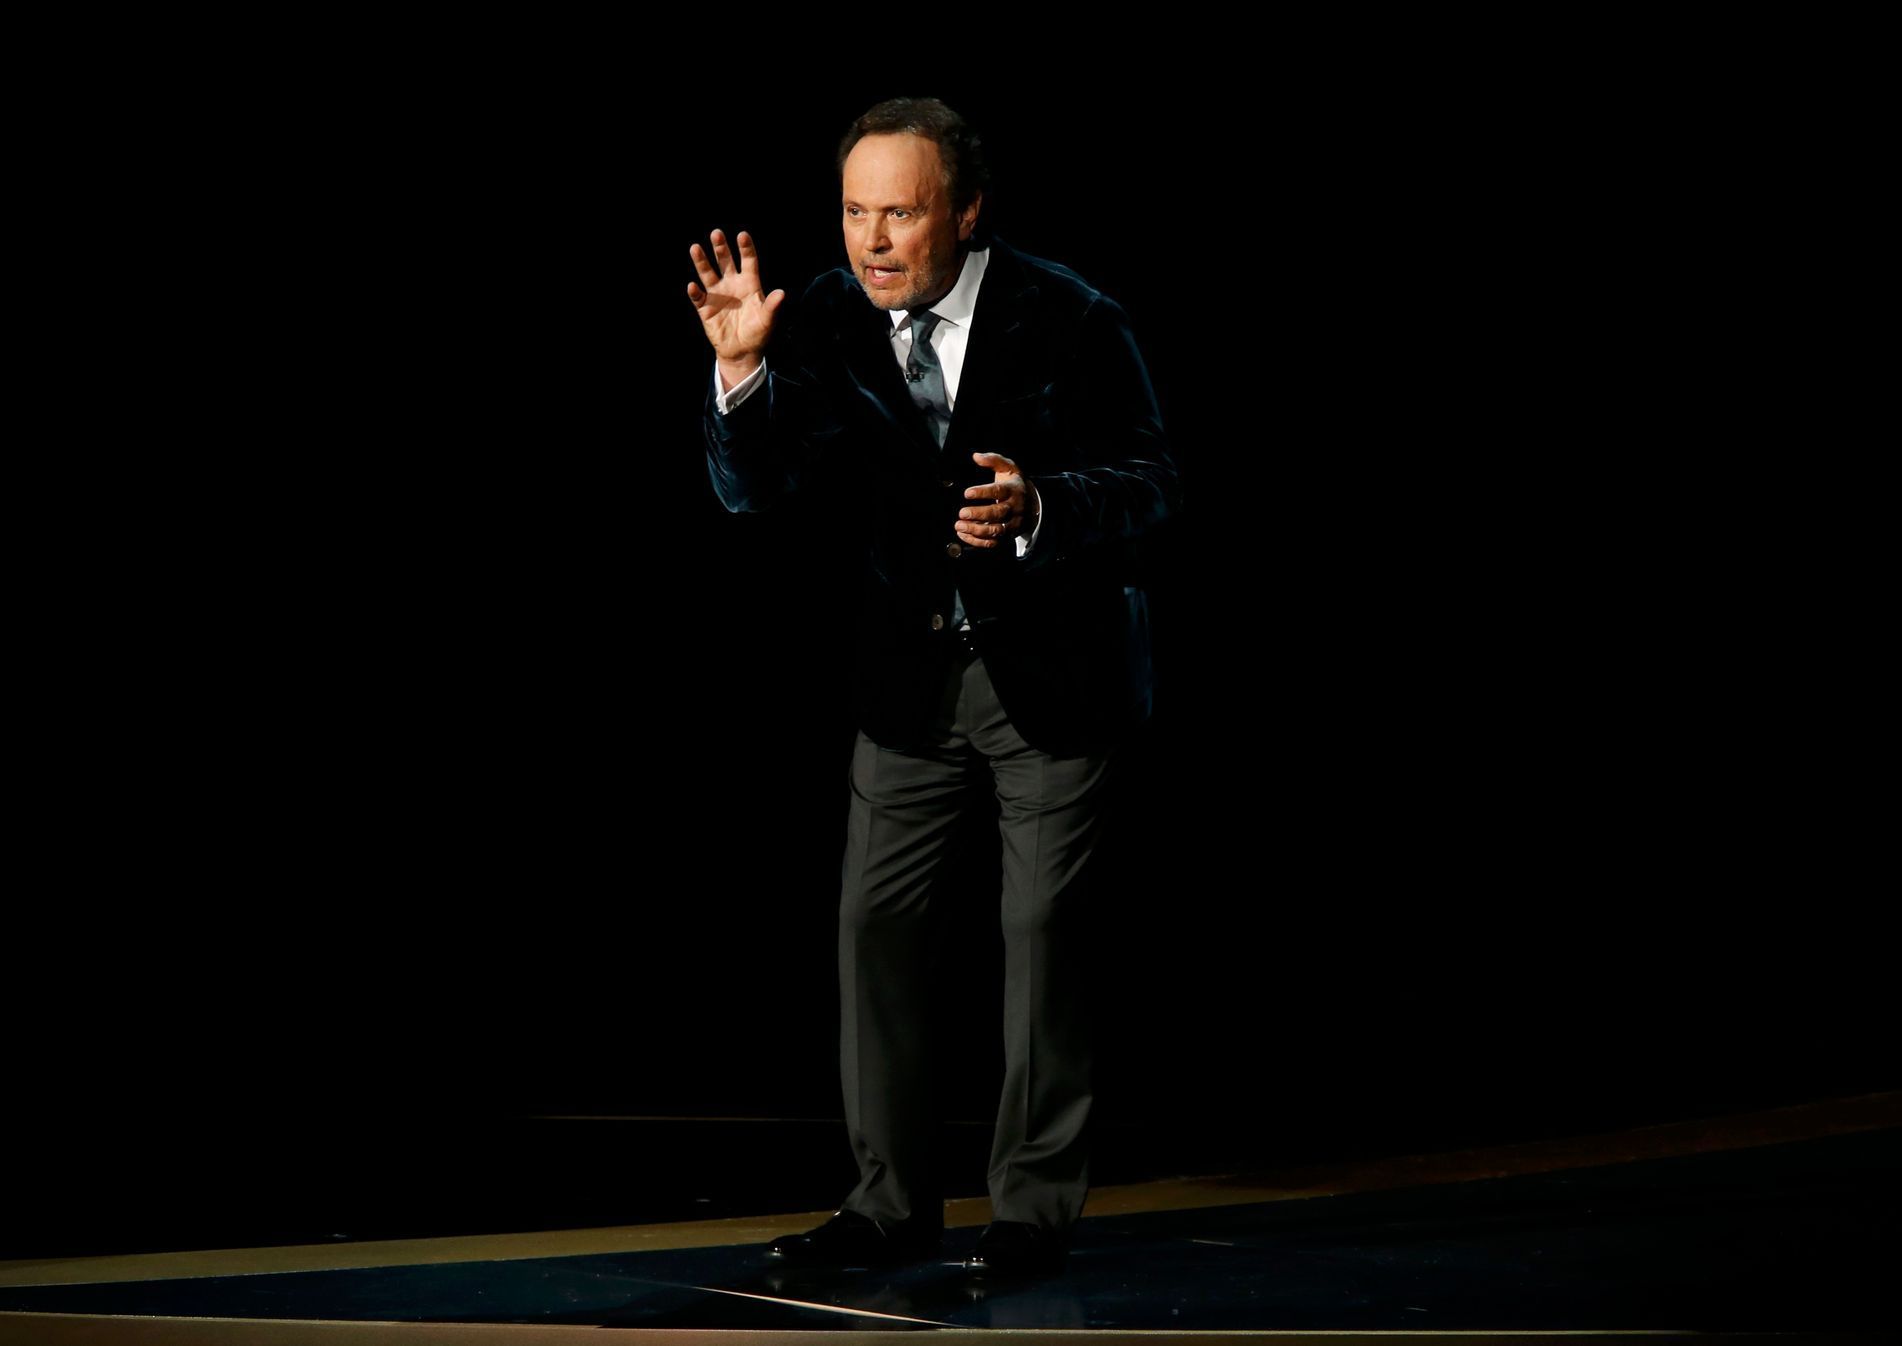 Billy Crystal pays tribute to Robin Williams during the 66th Primetime Emmy Awards in Los Angeles